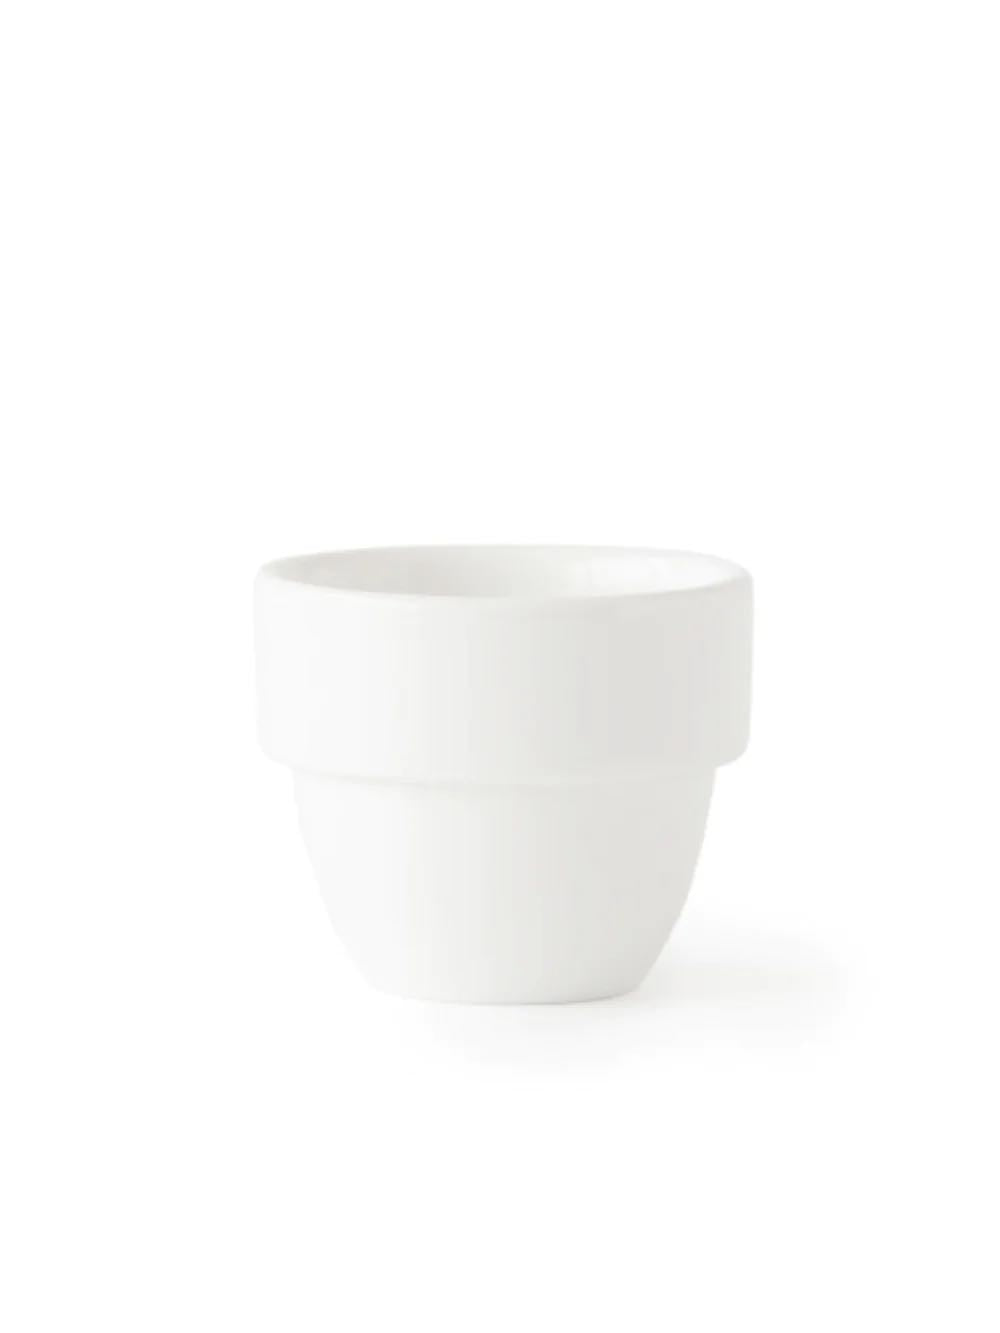 Acme Taster Cup (110ml/3.72oz) - Cupping Bowl - Image 1